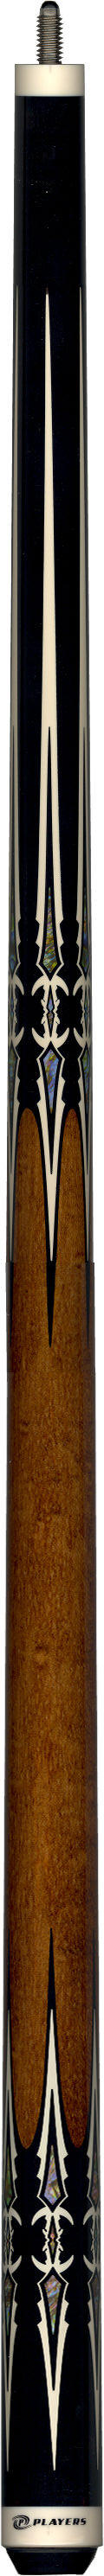 Players G-4114 Pool Cue